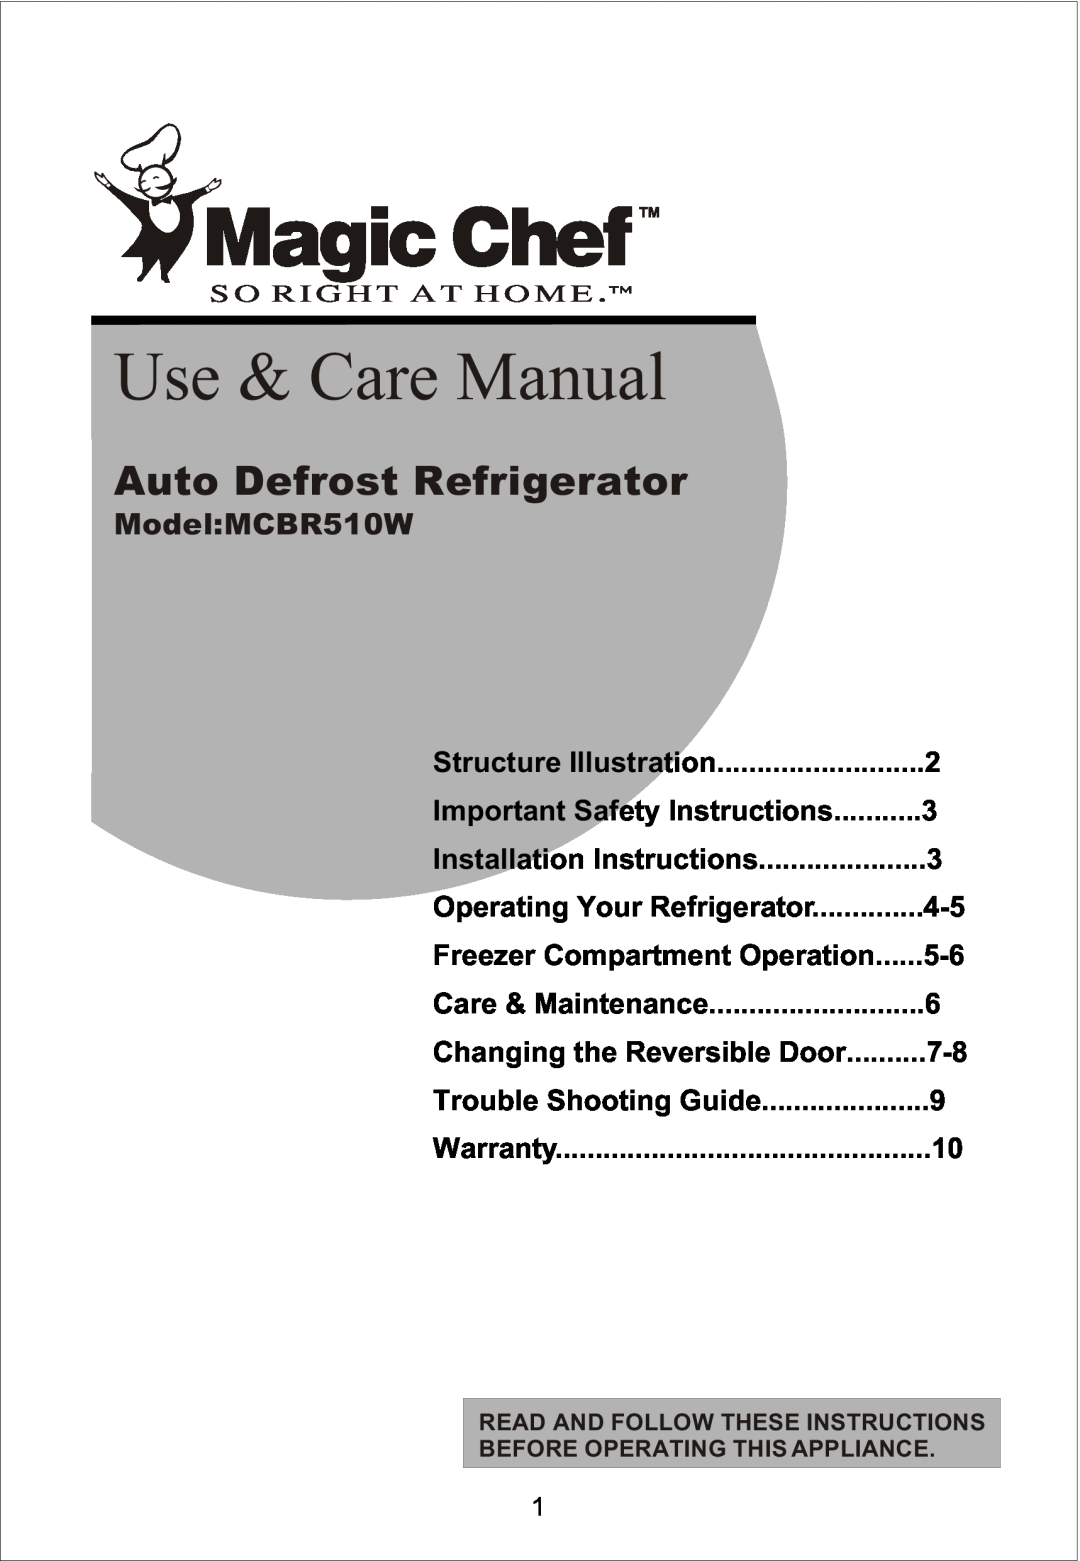 Magic Chef important safety instructions Magic Chef, Use & Care Manual, Auto Defrost Refrigerator, Model MCBR510W 